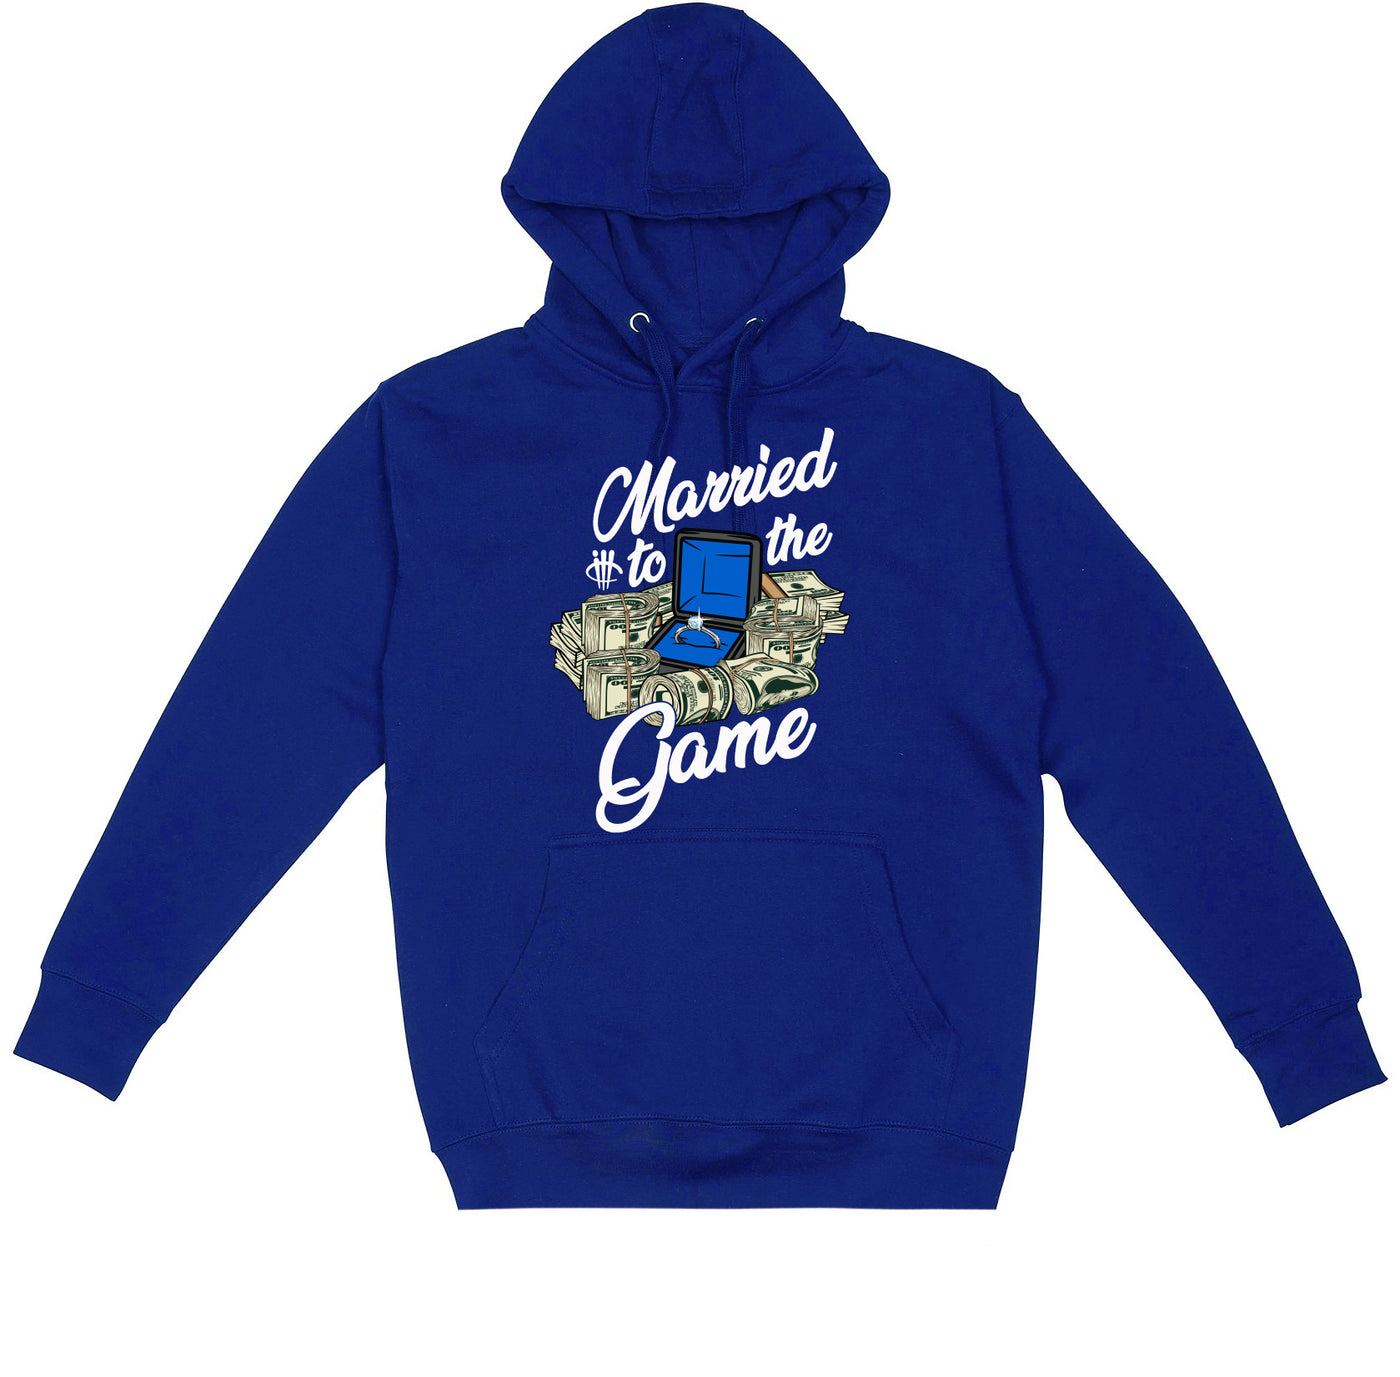 Air Jordan 1 Royal Reimagined | Illcurrency Royal Blue T-Shirt (MARRIED TO THE GAME)